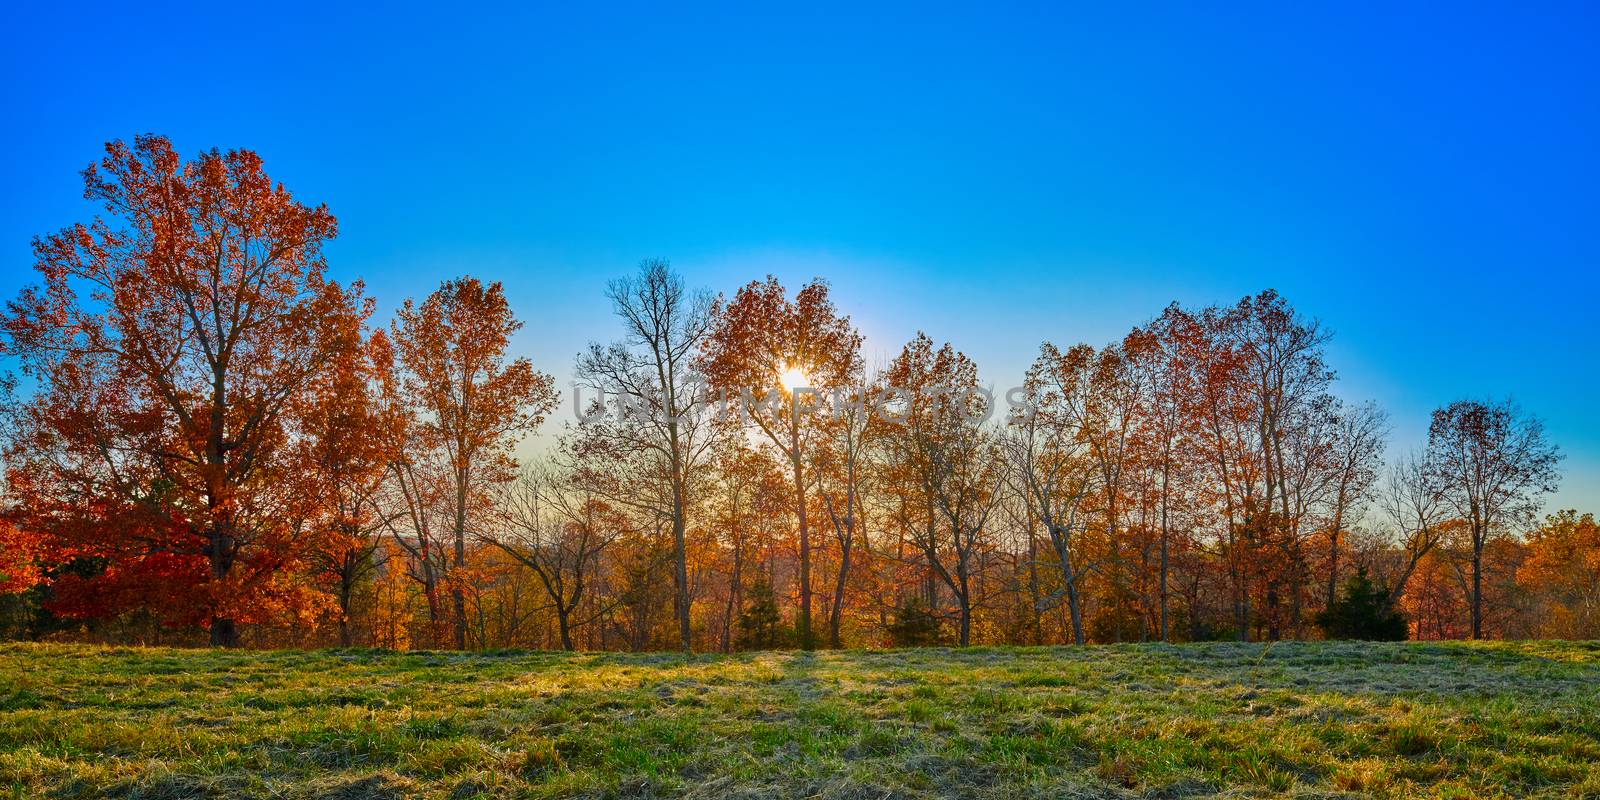 Setting sun behind Fall colored trees with blue sky.